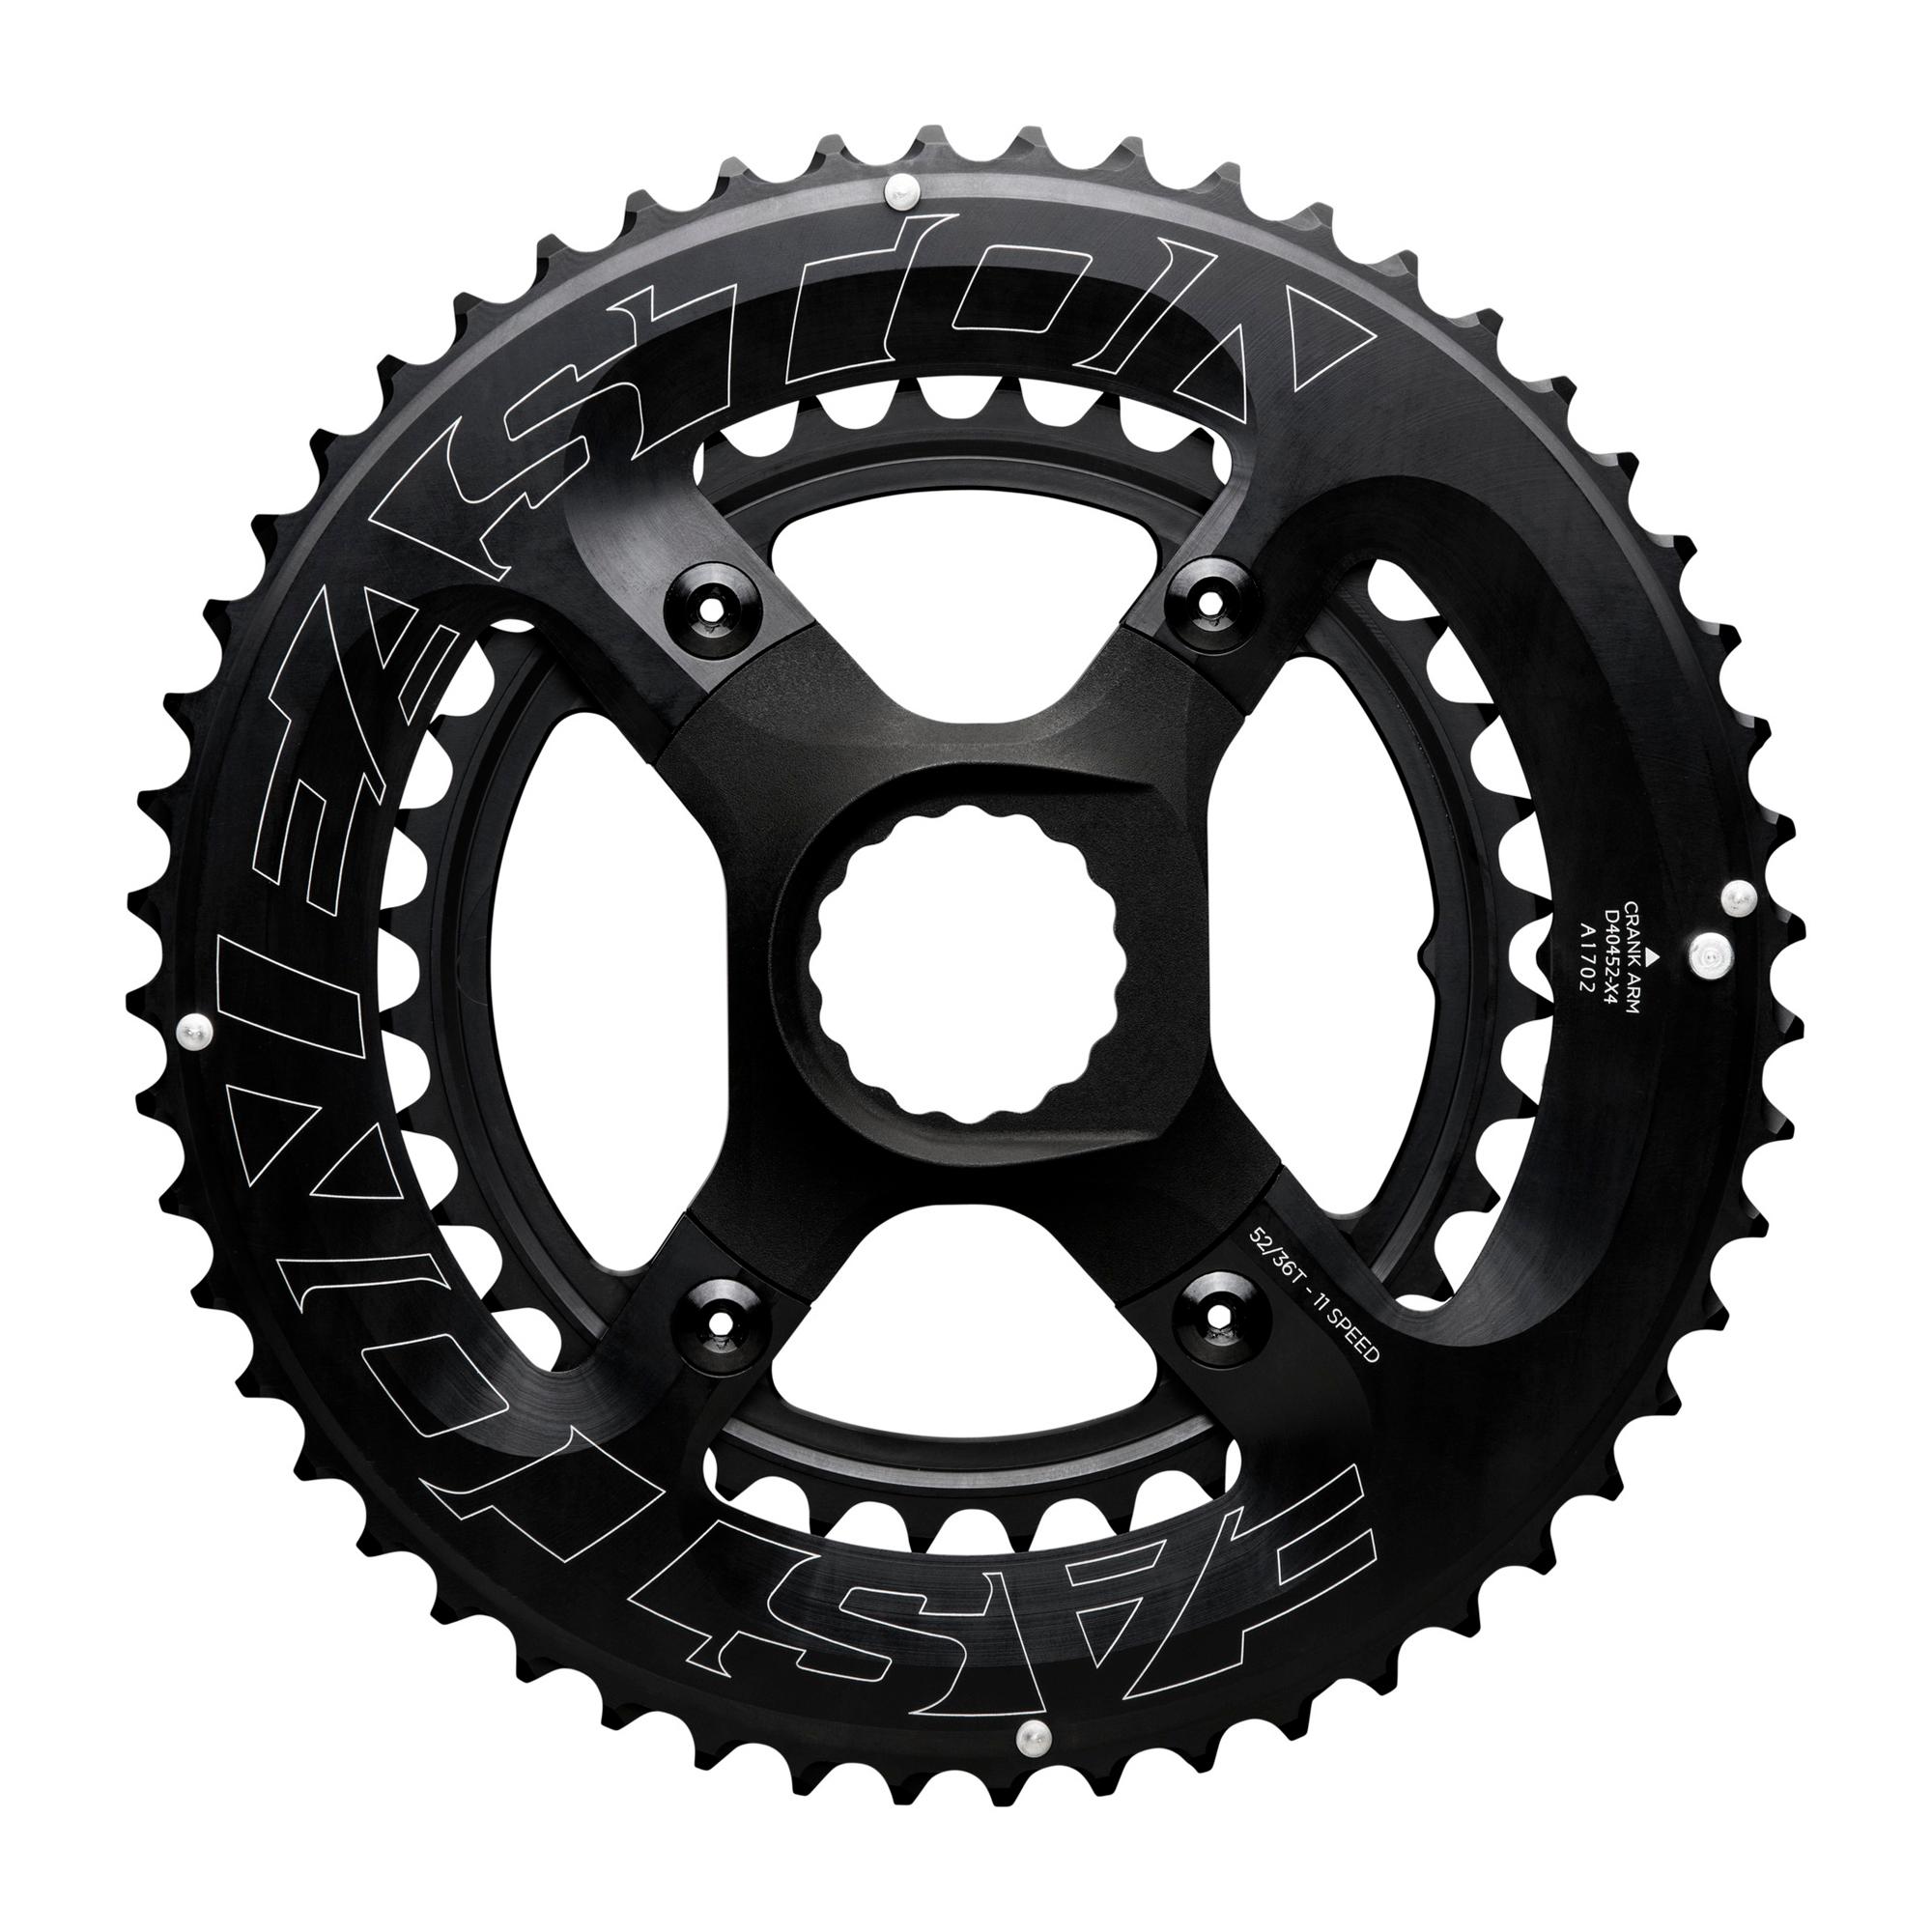 Easton 4-Bolt 11 Speed Shifting Chainring